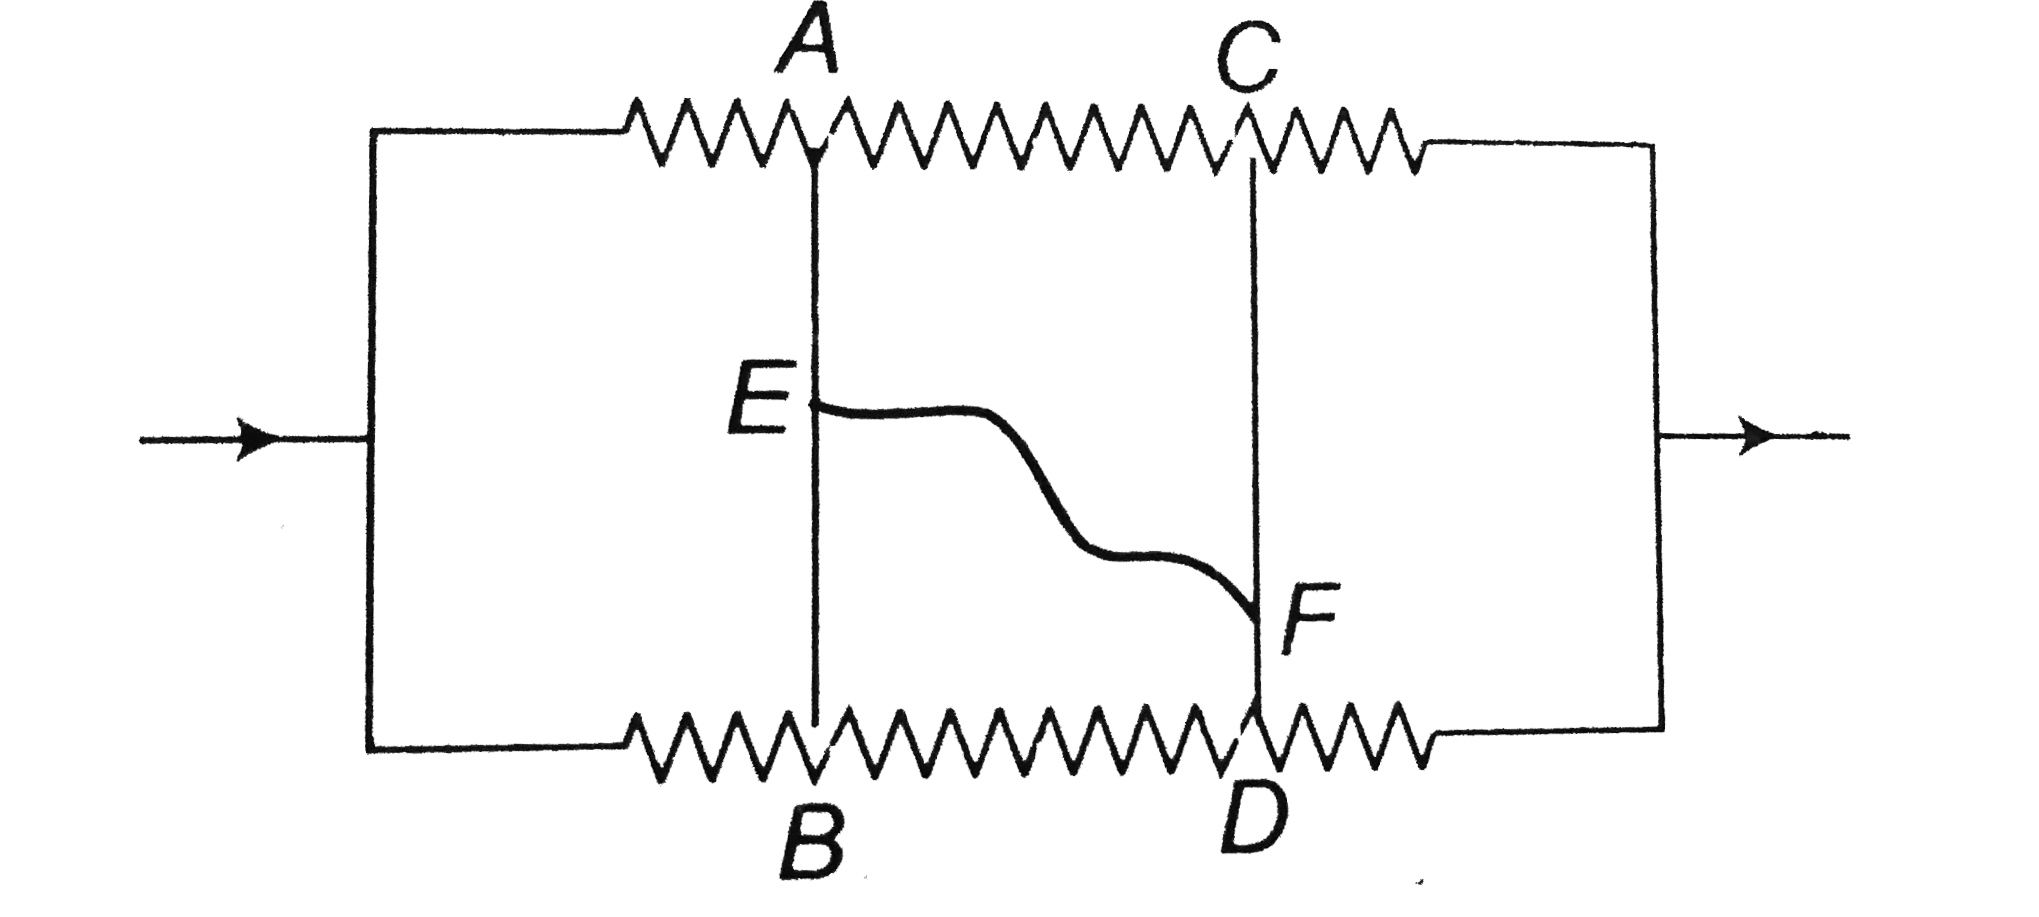 Two conductors AB and CD are connected between two parallel resistors in such a way that no current flows through them. Then a wire is connected between between E and F.